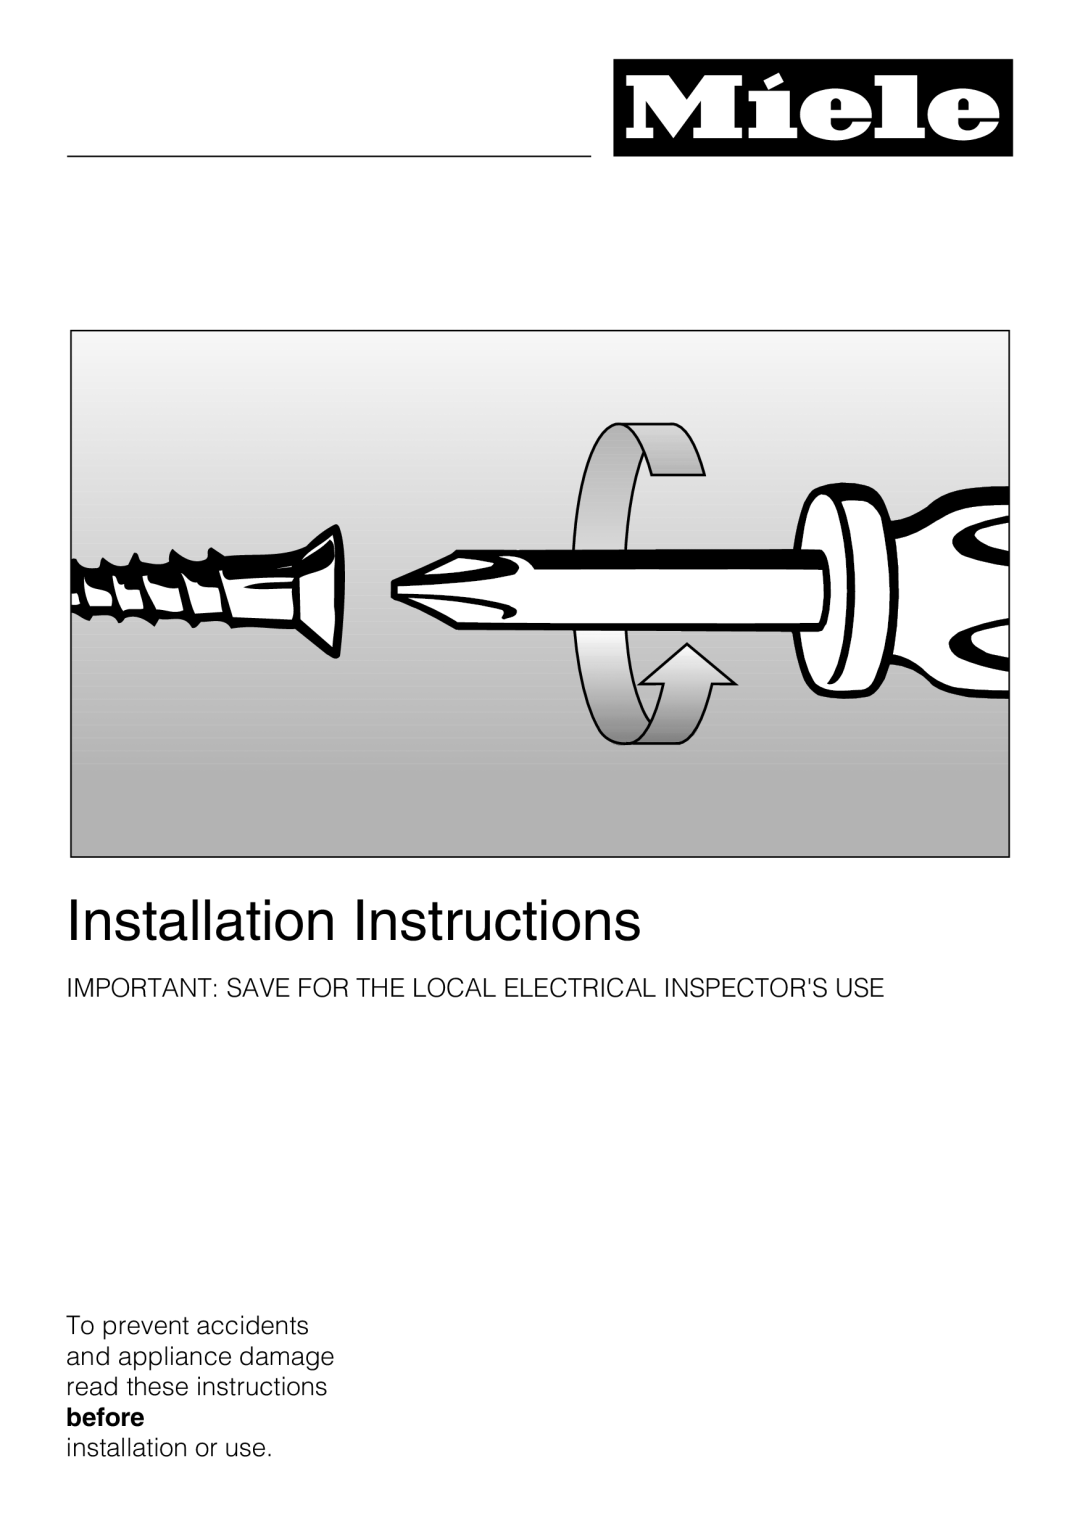 Miele CS1028 Installation Instructions, Important Save For The Local Electrical Inspectors Use, installation or use 